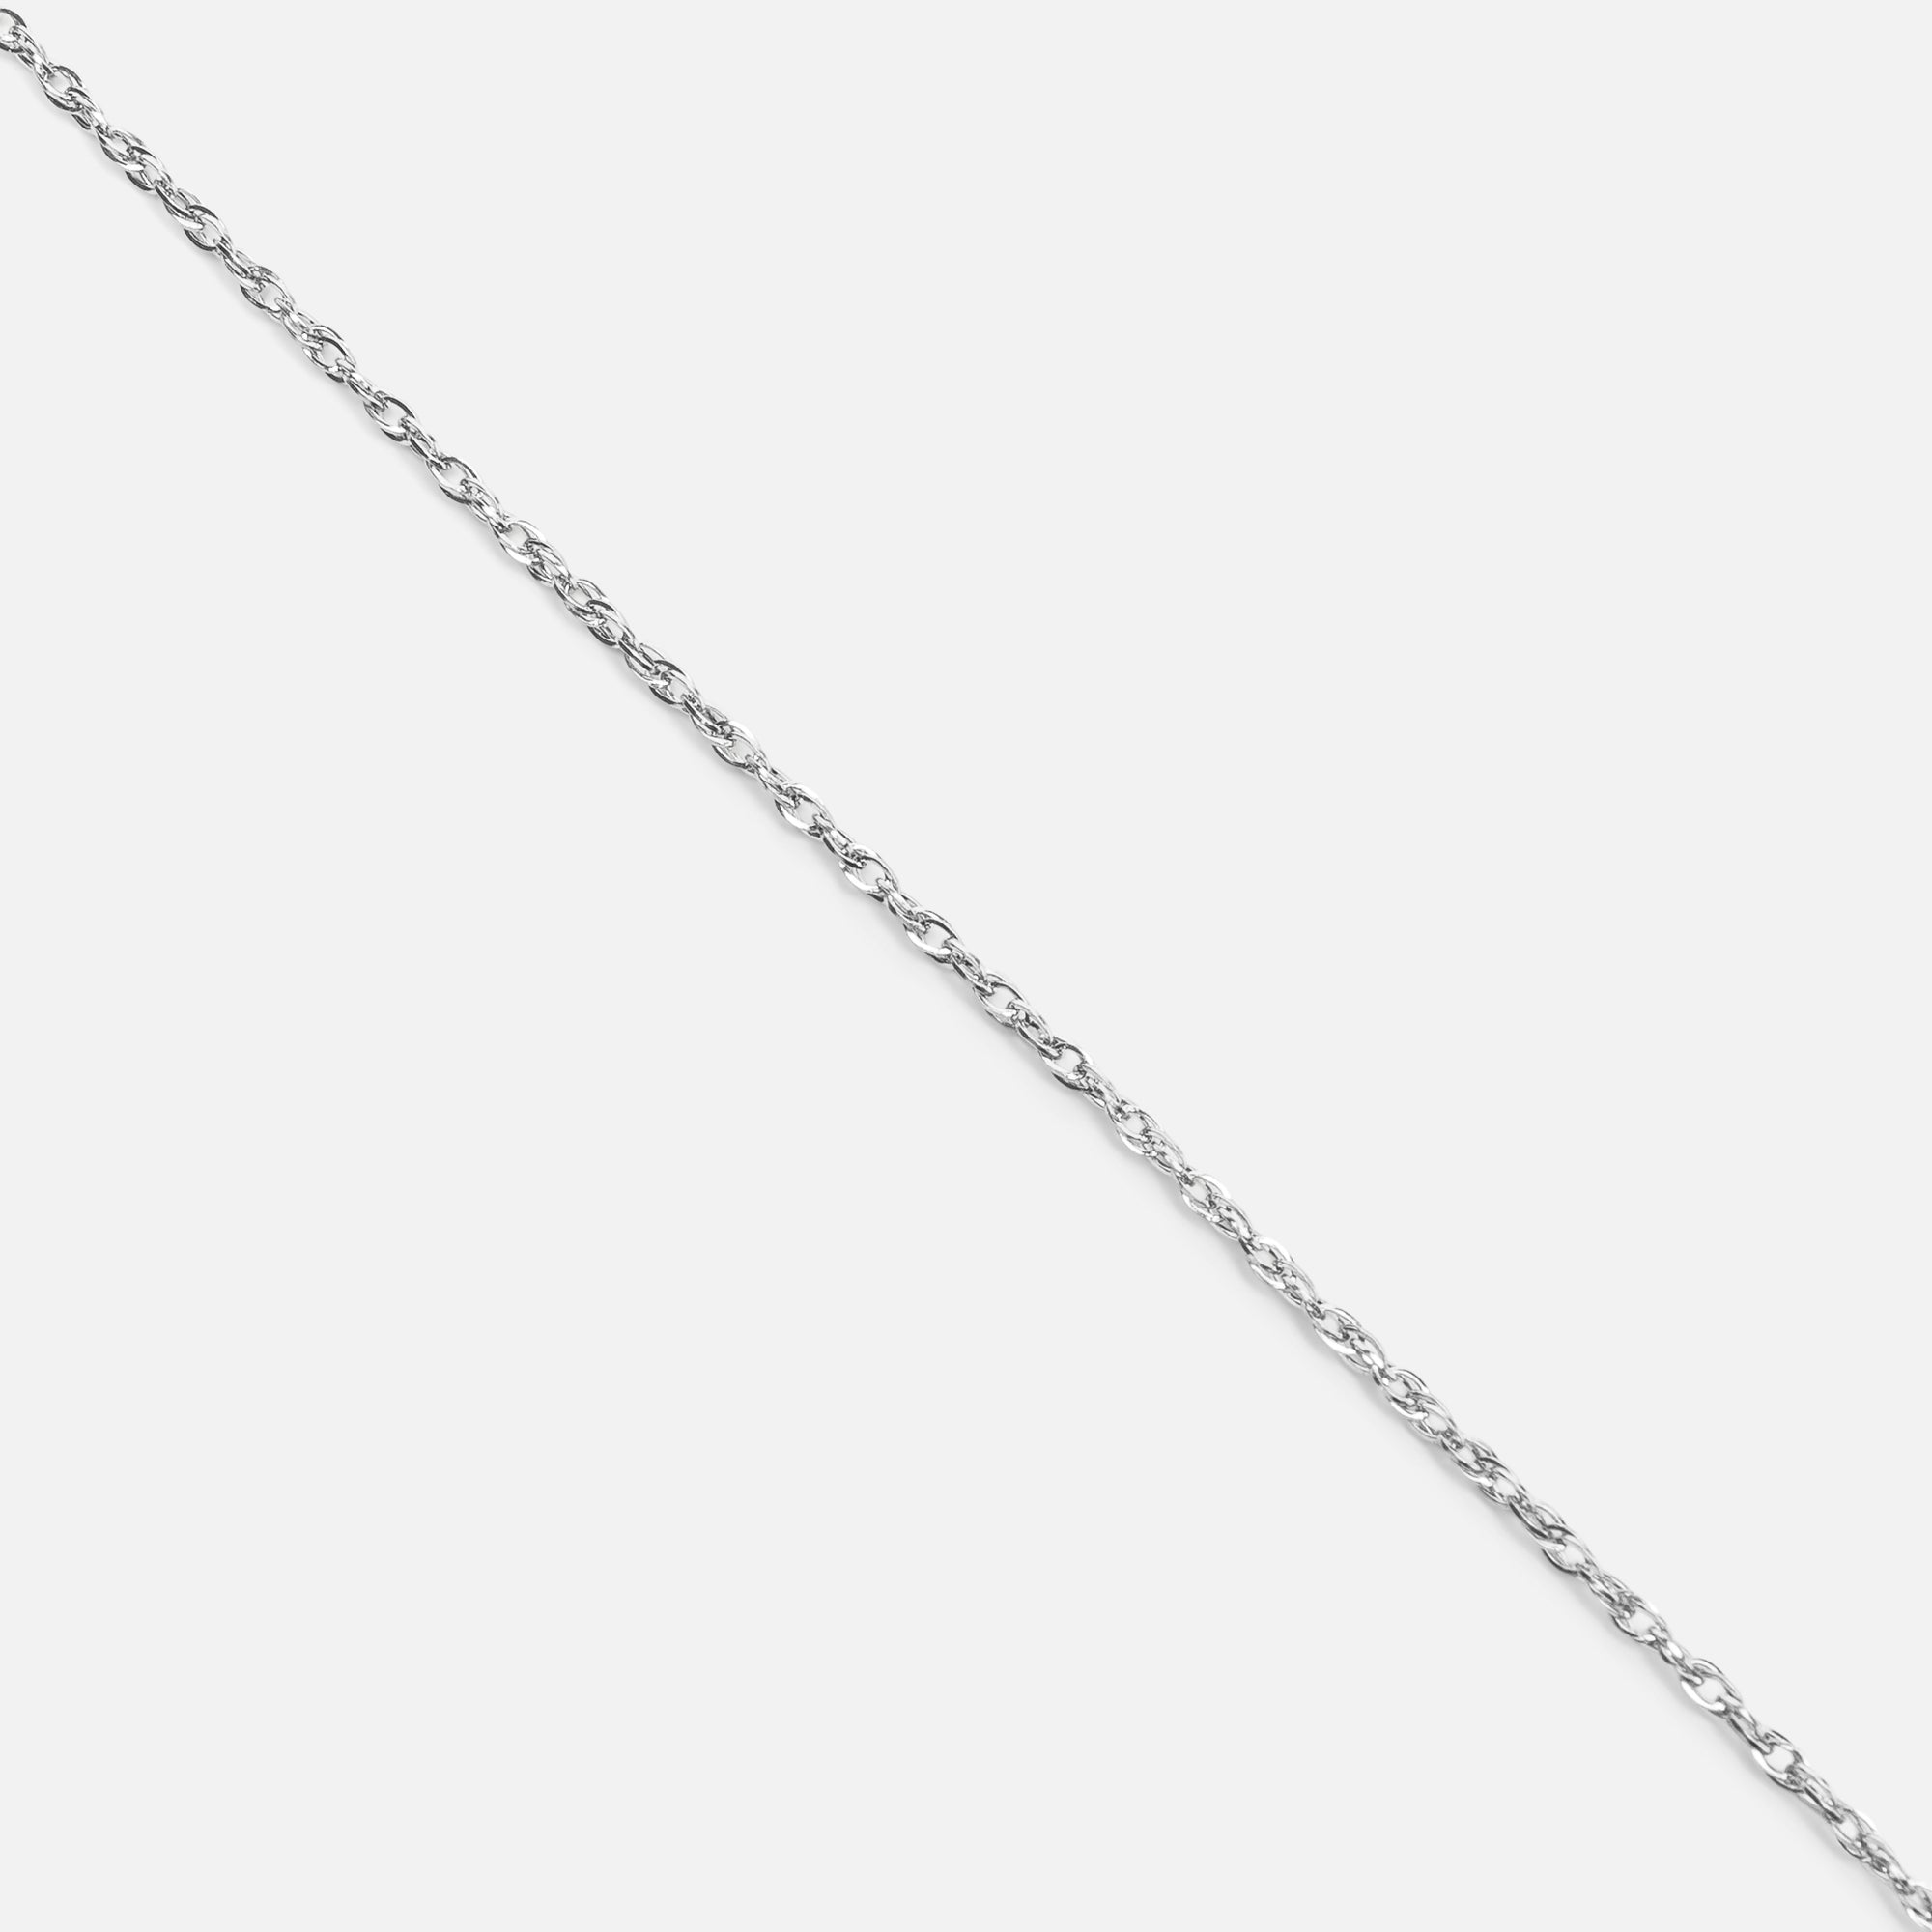 Stainless steel singapore silver chain bracelet